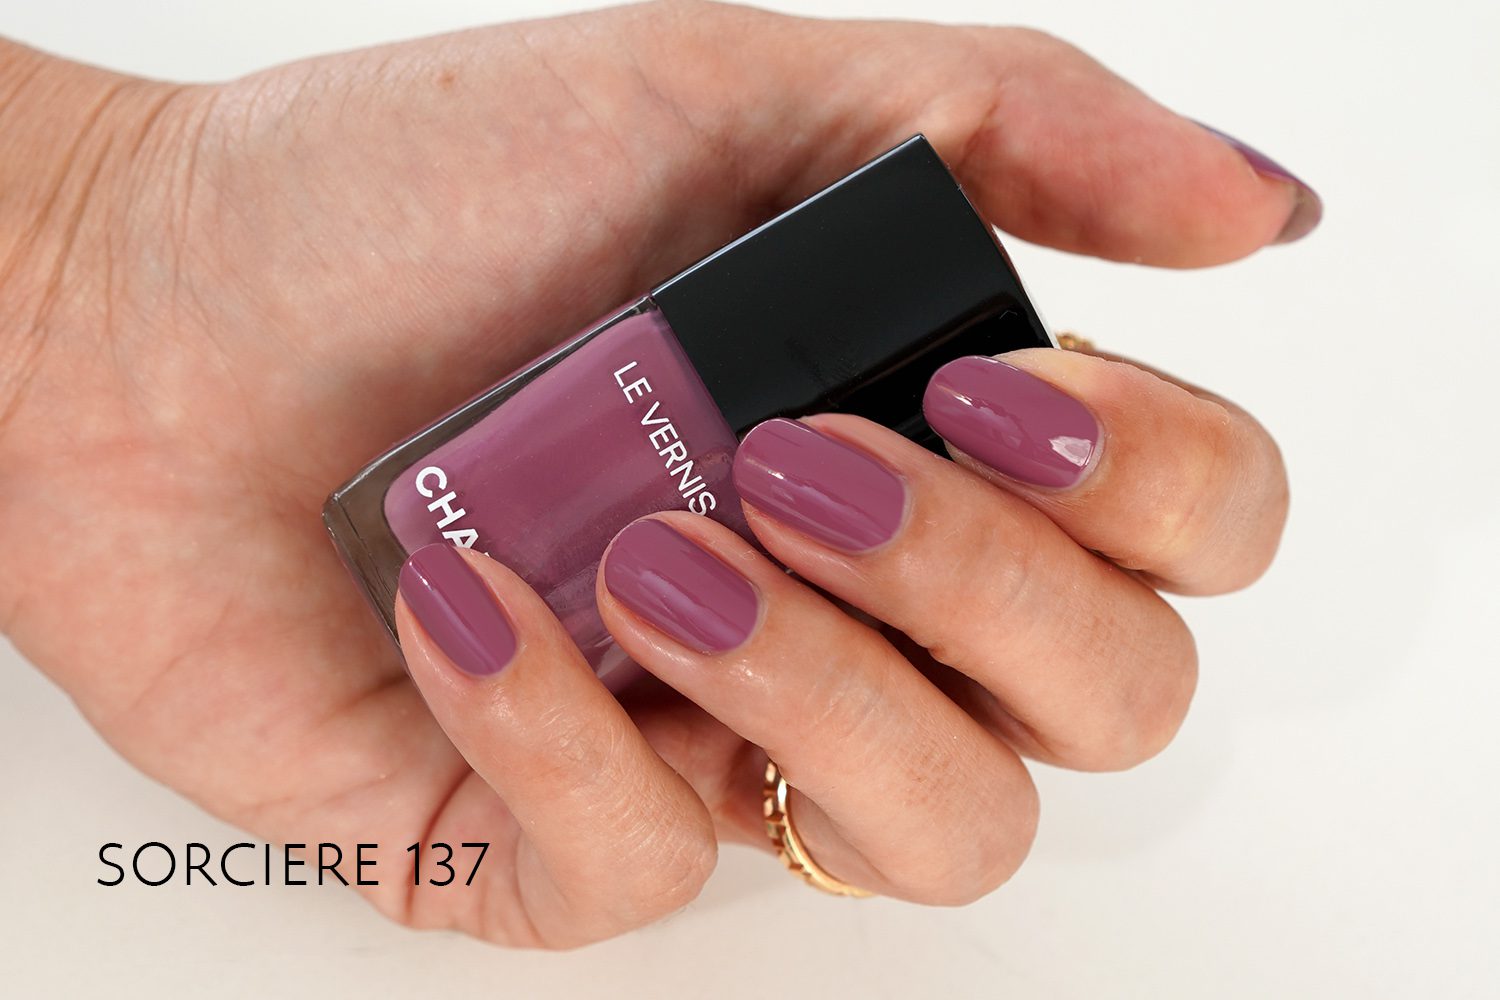 New Chanel Le Vernis Nail Colors - The Beauty Look Book